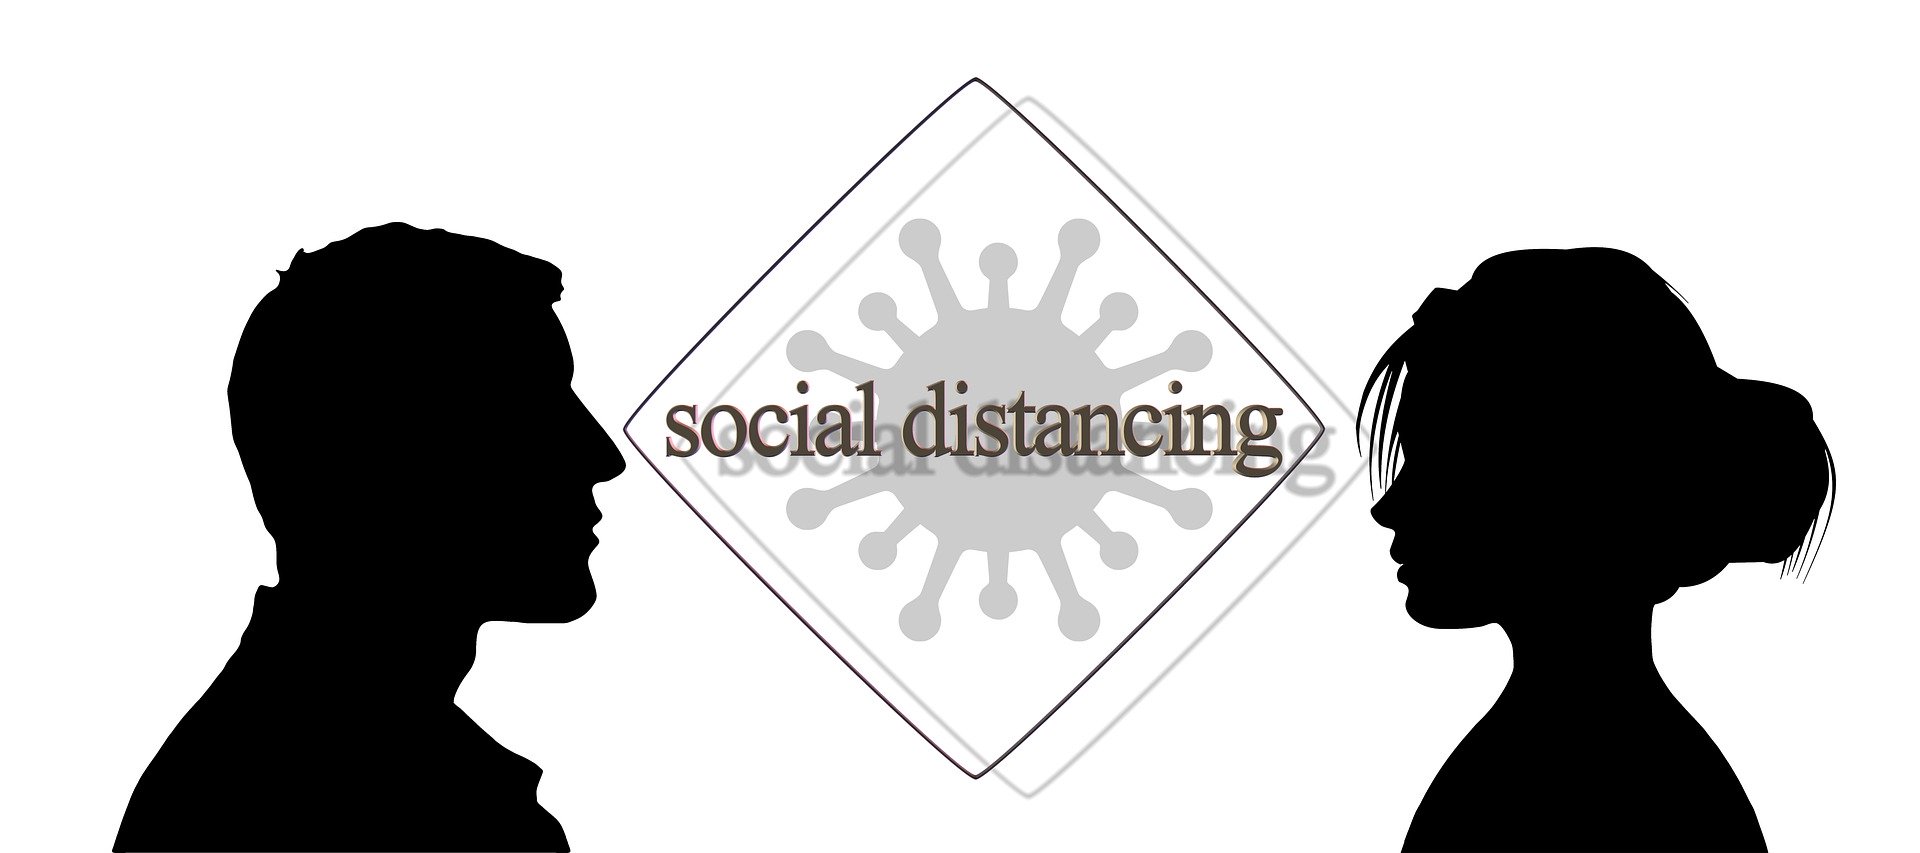 Social Distancing during COVID-19